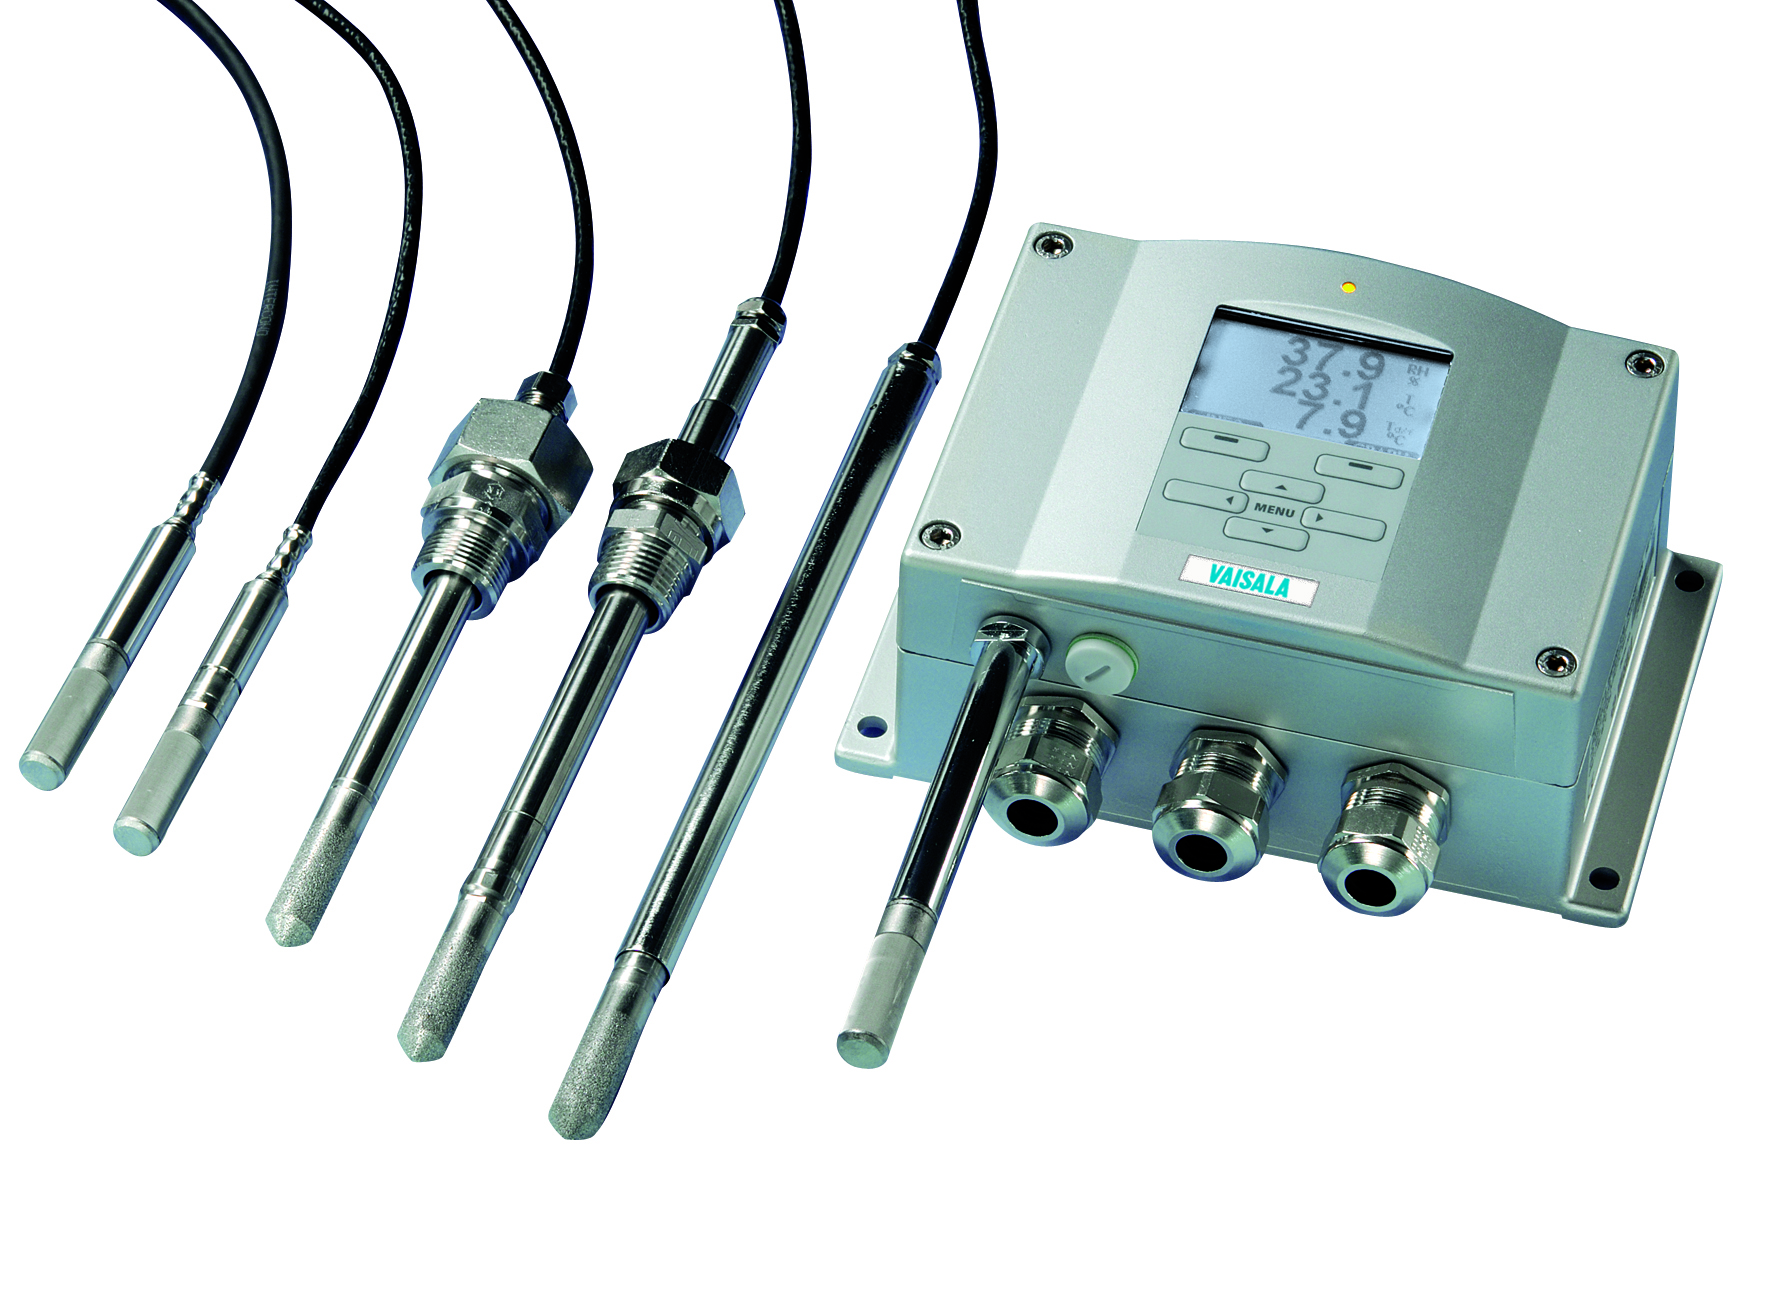 https://www.iag.co.at/fileadmin/user_upload/product_images/humidity_measurement_with_hmt330.jpg